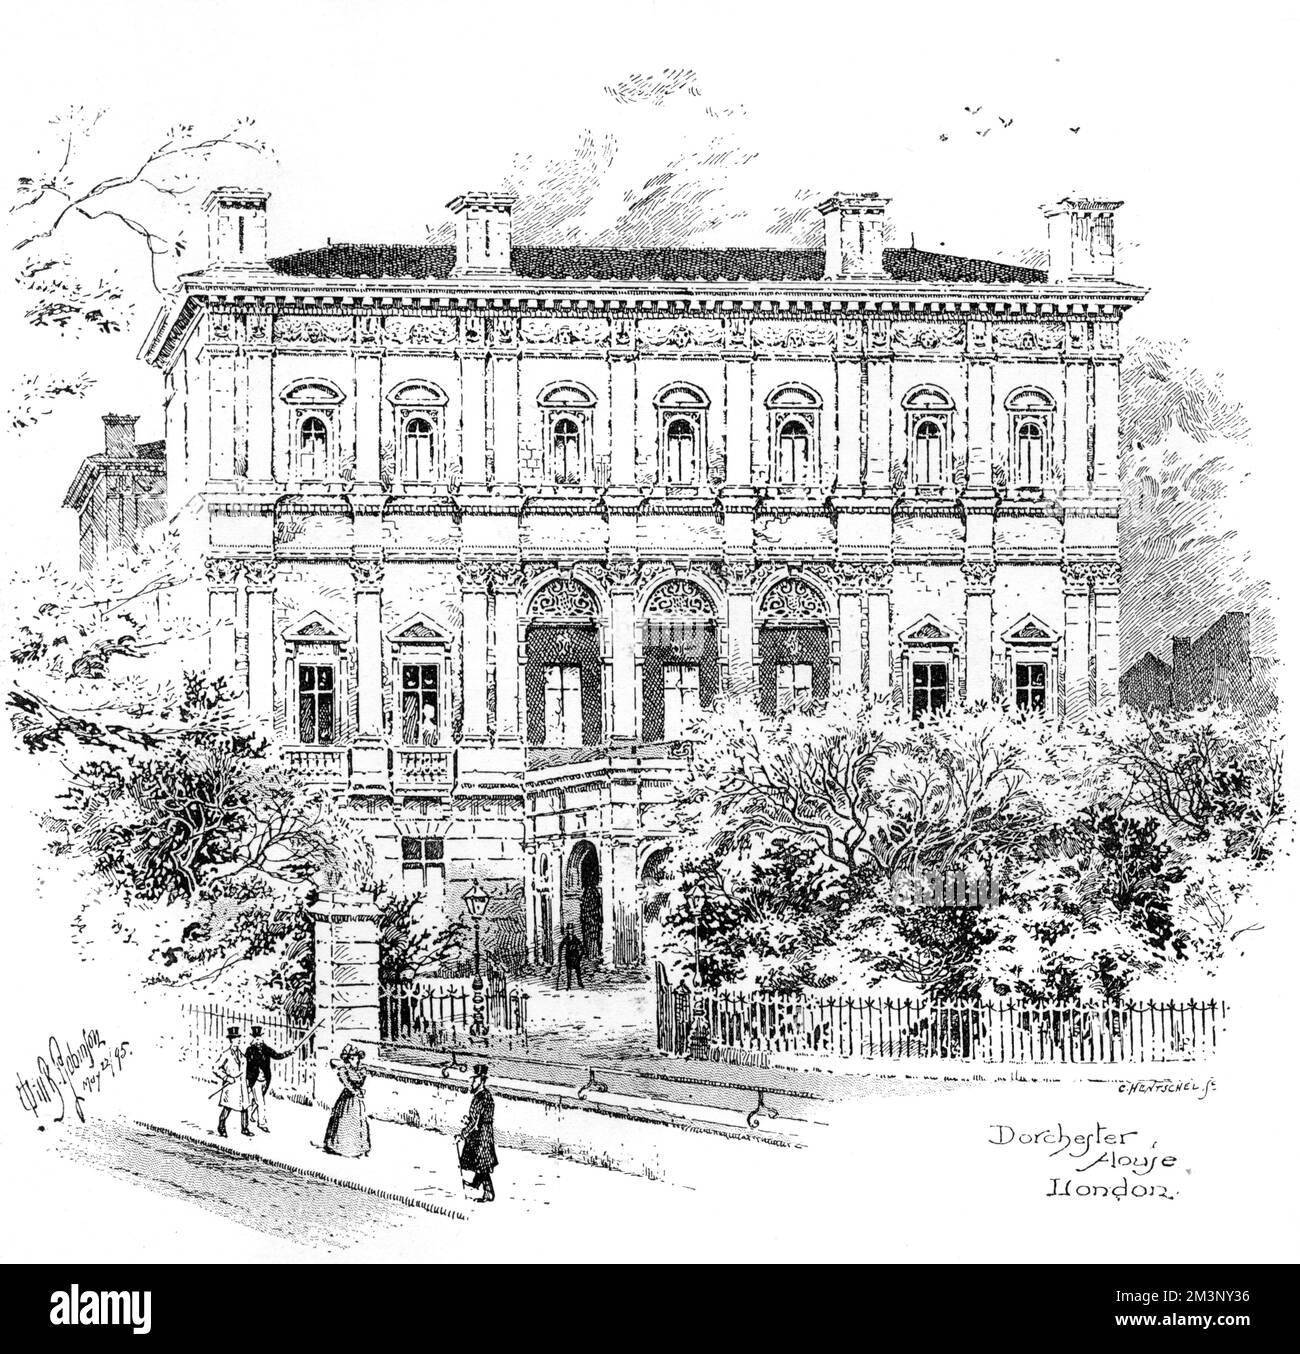 Dorchester House, Park Lane, designed by Lewis Vulliamy for Robert Holford, built on the site of an earlier house belonging to the Earls of Dorchester in 1851 - 53.  It was the residence of Mr. Whitelaw Reid, American Ambassador to the Court of St. James's, from 1905-13 and served as a hospital during World War I.  One of the most impressive and palatial mansions in London, It contained a fine picture gallery, library and was particularly noted for its grand staircase.  The house was sold in 1929 and demolished to make way for the Dorchester Hotel.  Pictured in 1895 at the time the Shahzada Na Stock Photo